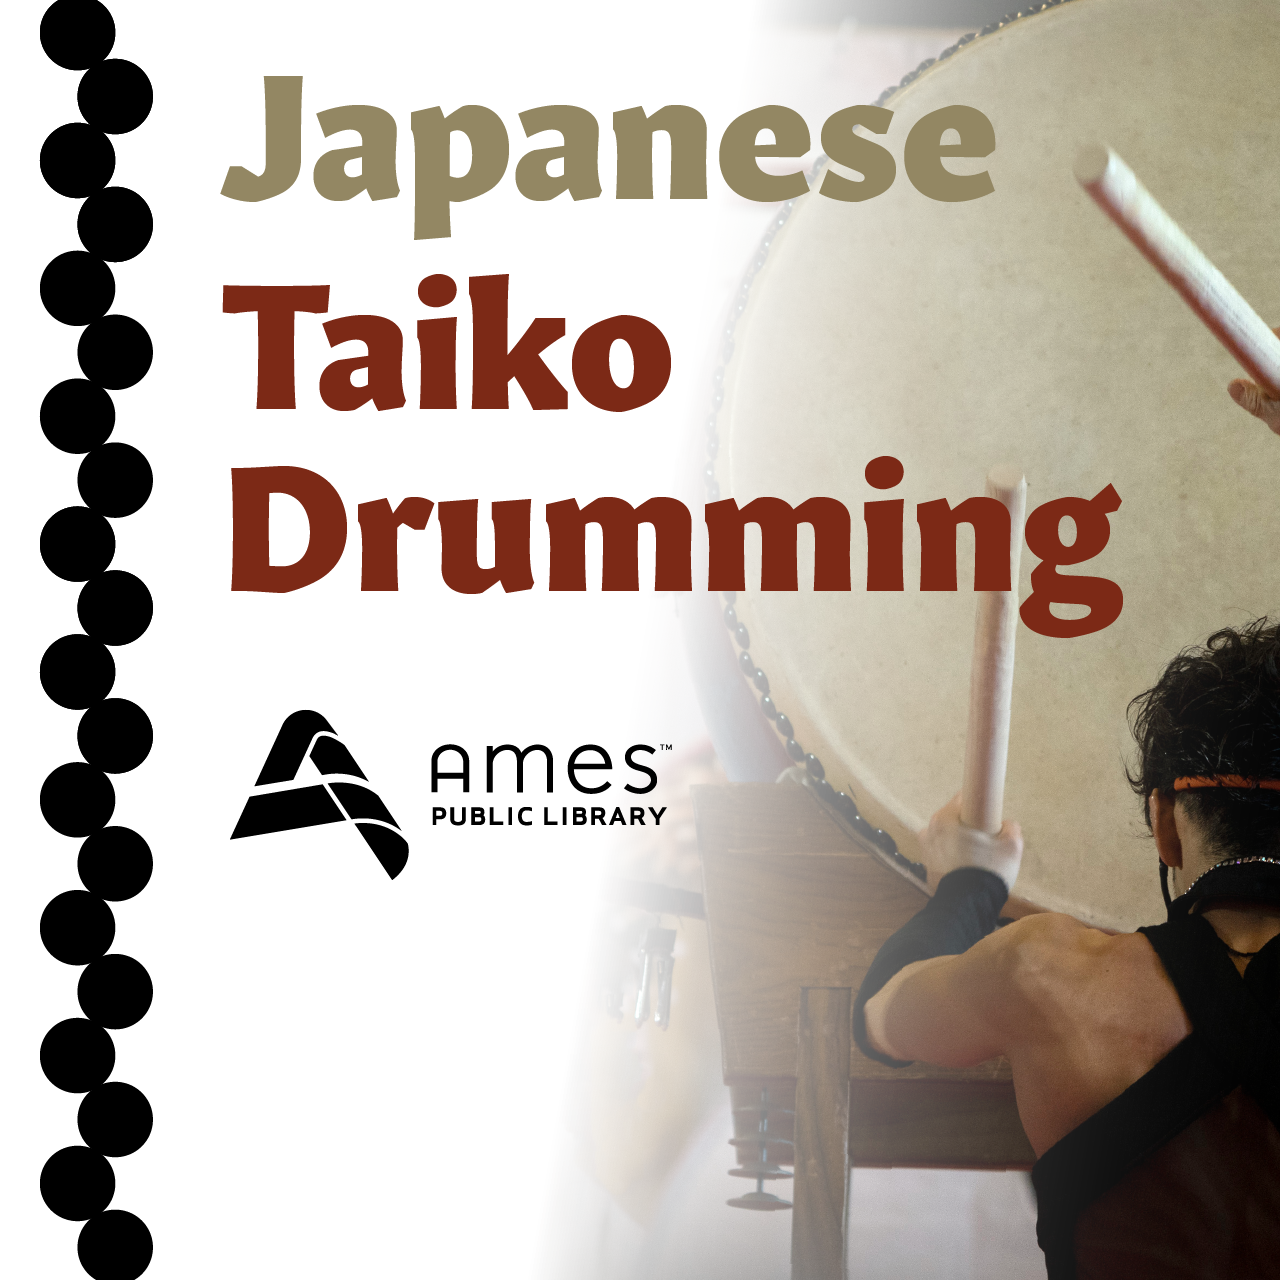 Photo of person holding mallets and playing a large Taiko drum.